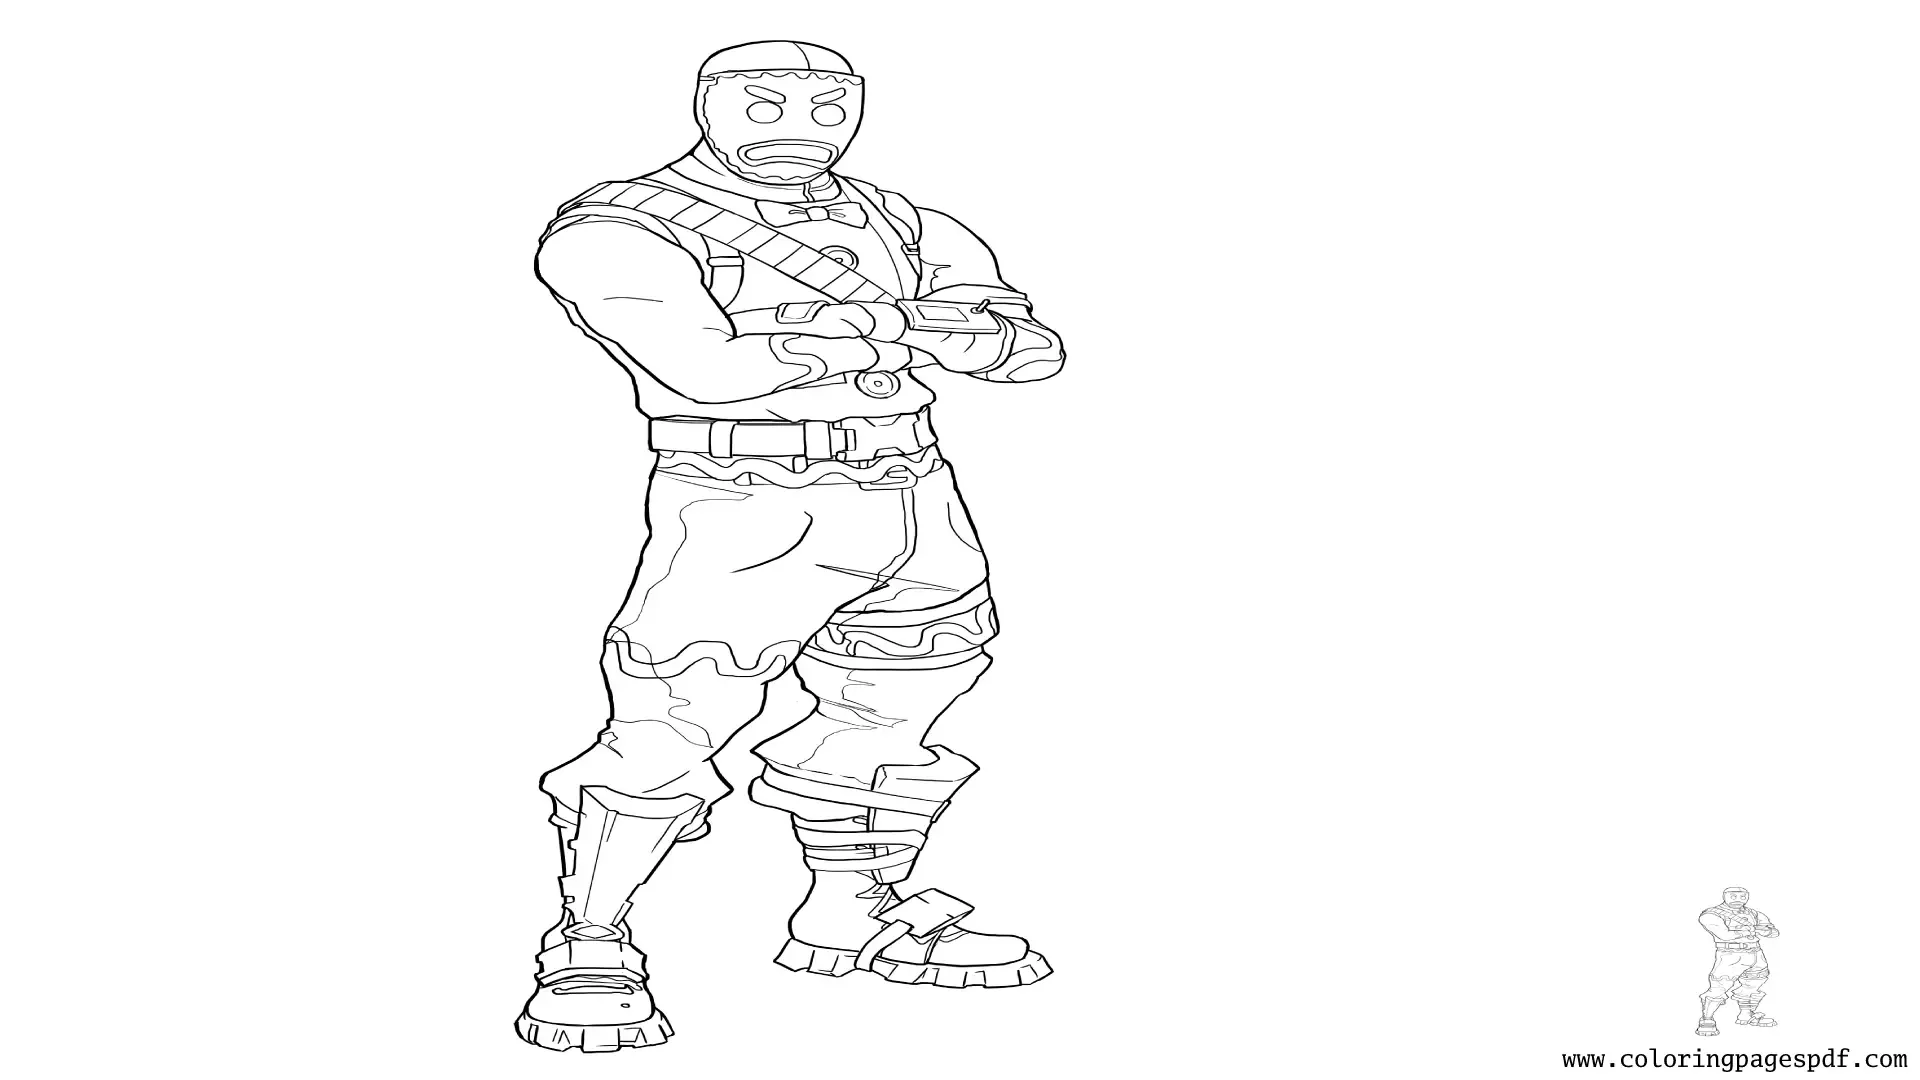 Coloring Page Of Fortnite Gingerbread Skin